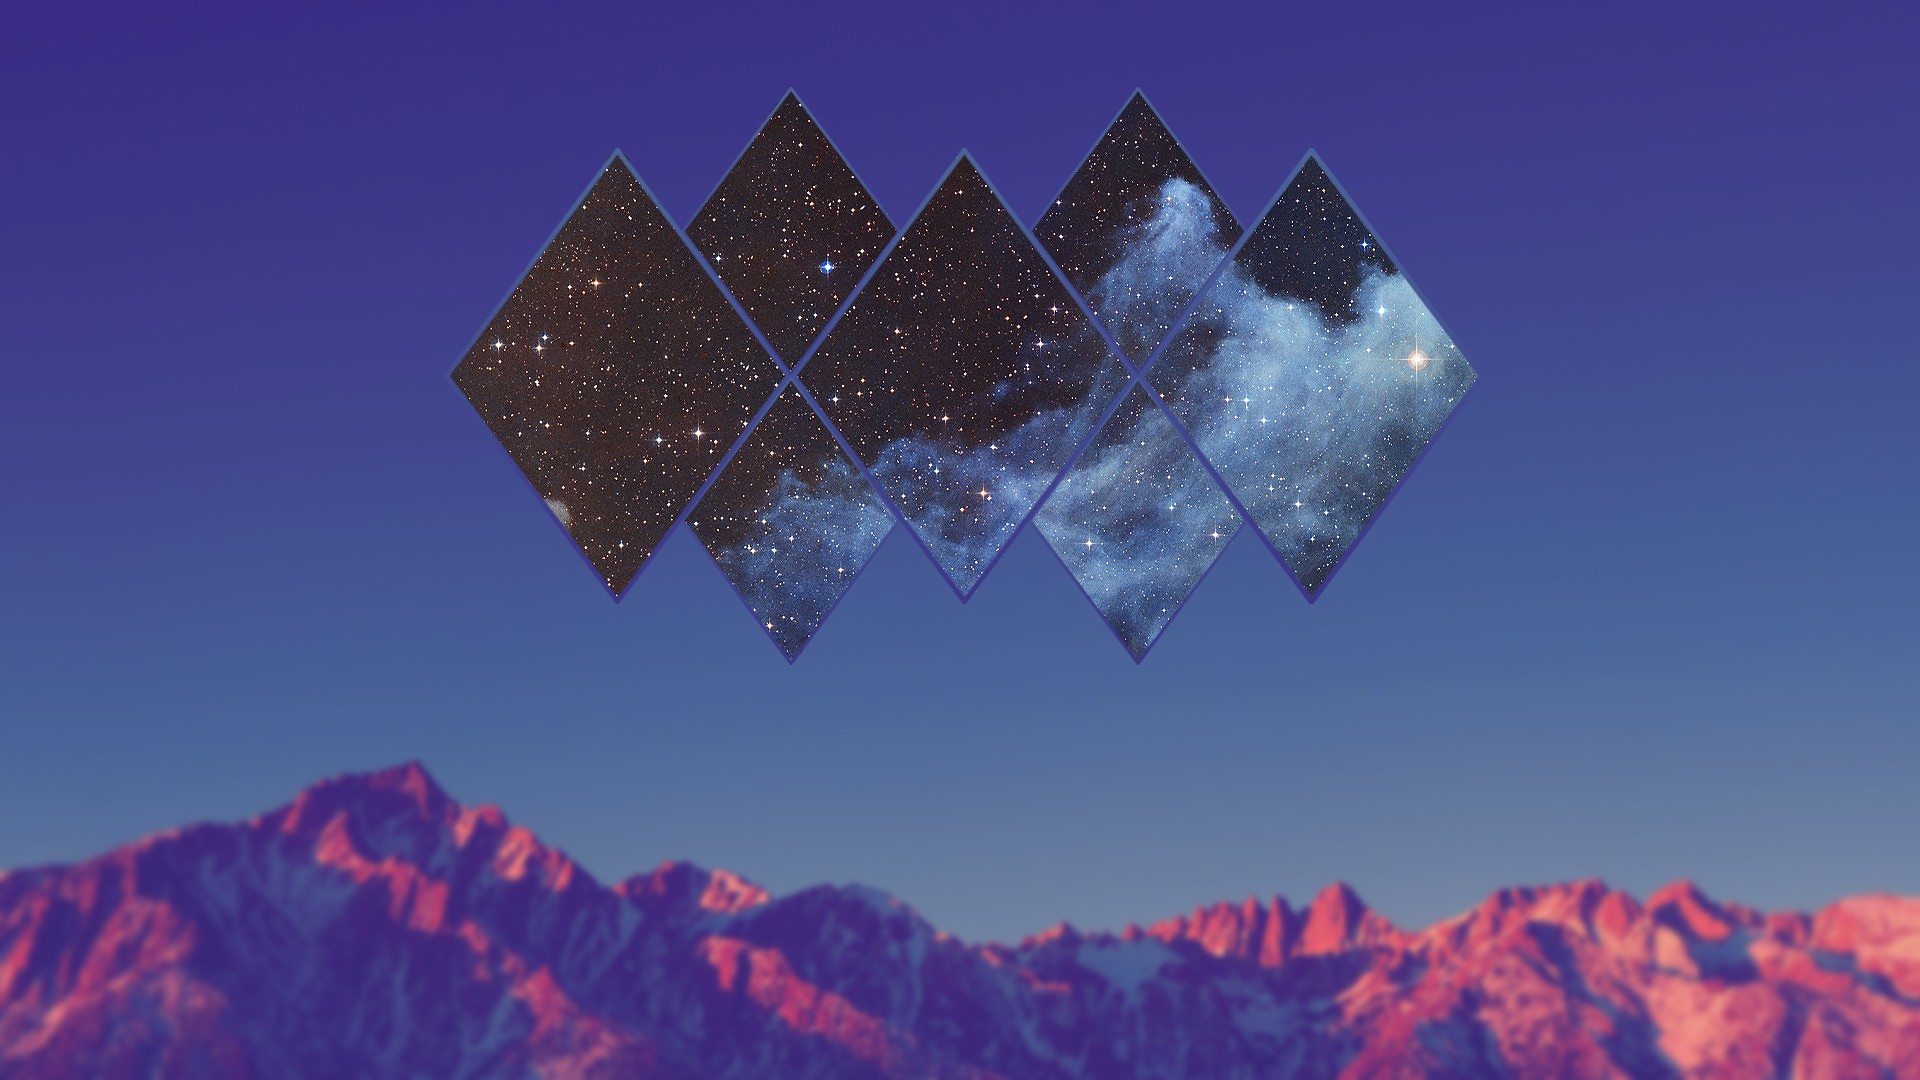 General 1920x1080 space mountains blurred landscape